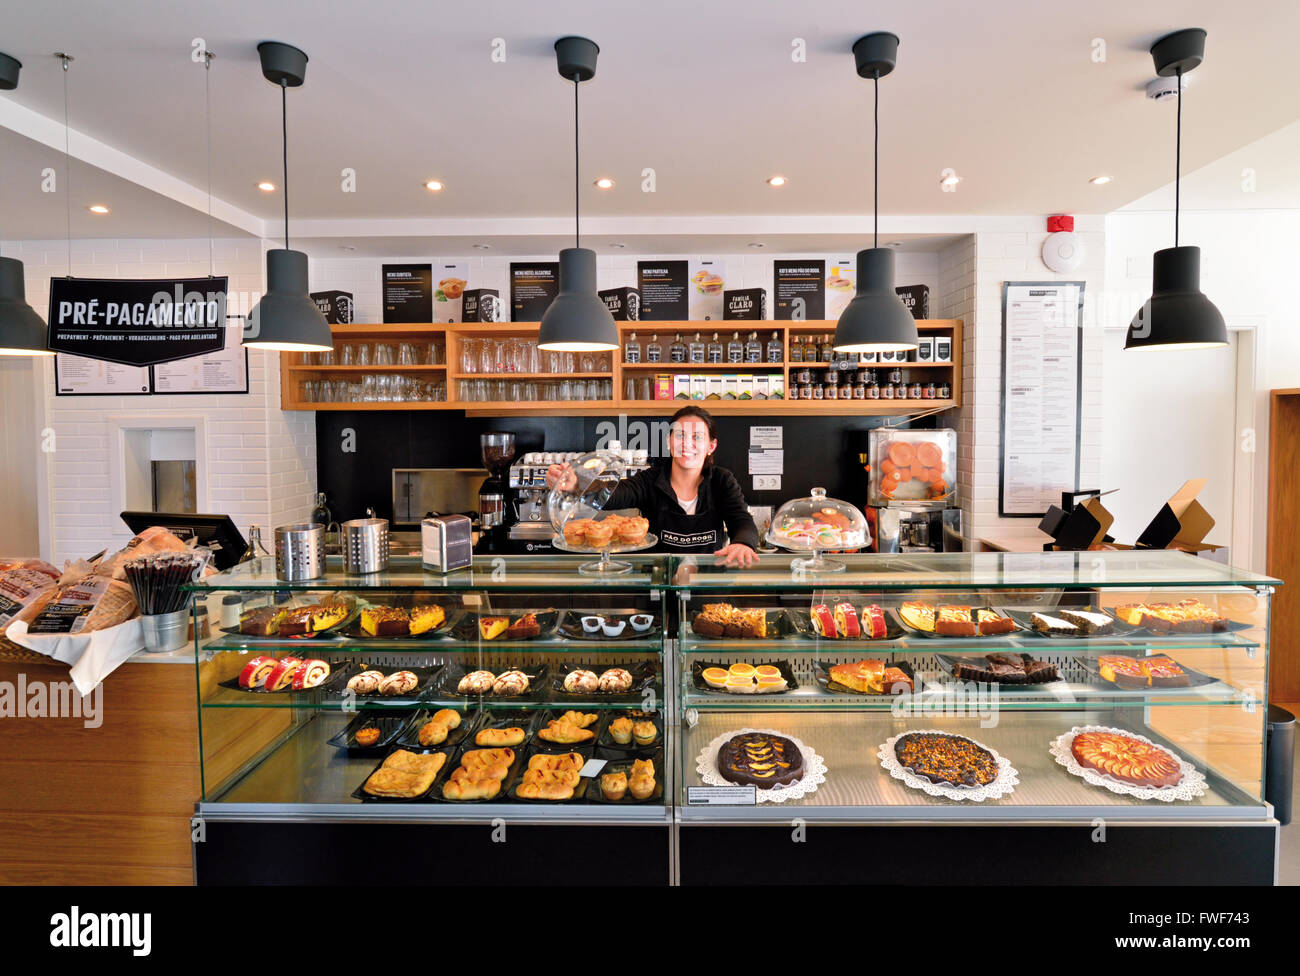 Portugal, Algarve: Interior of Bakery/Café Pao do Rogil with a variety of traditional cakes and pastry Stock Photo